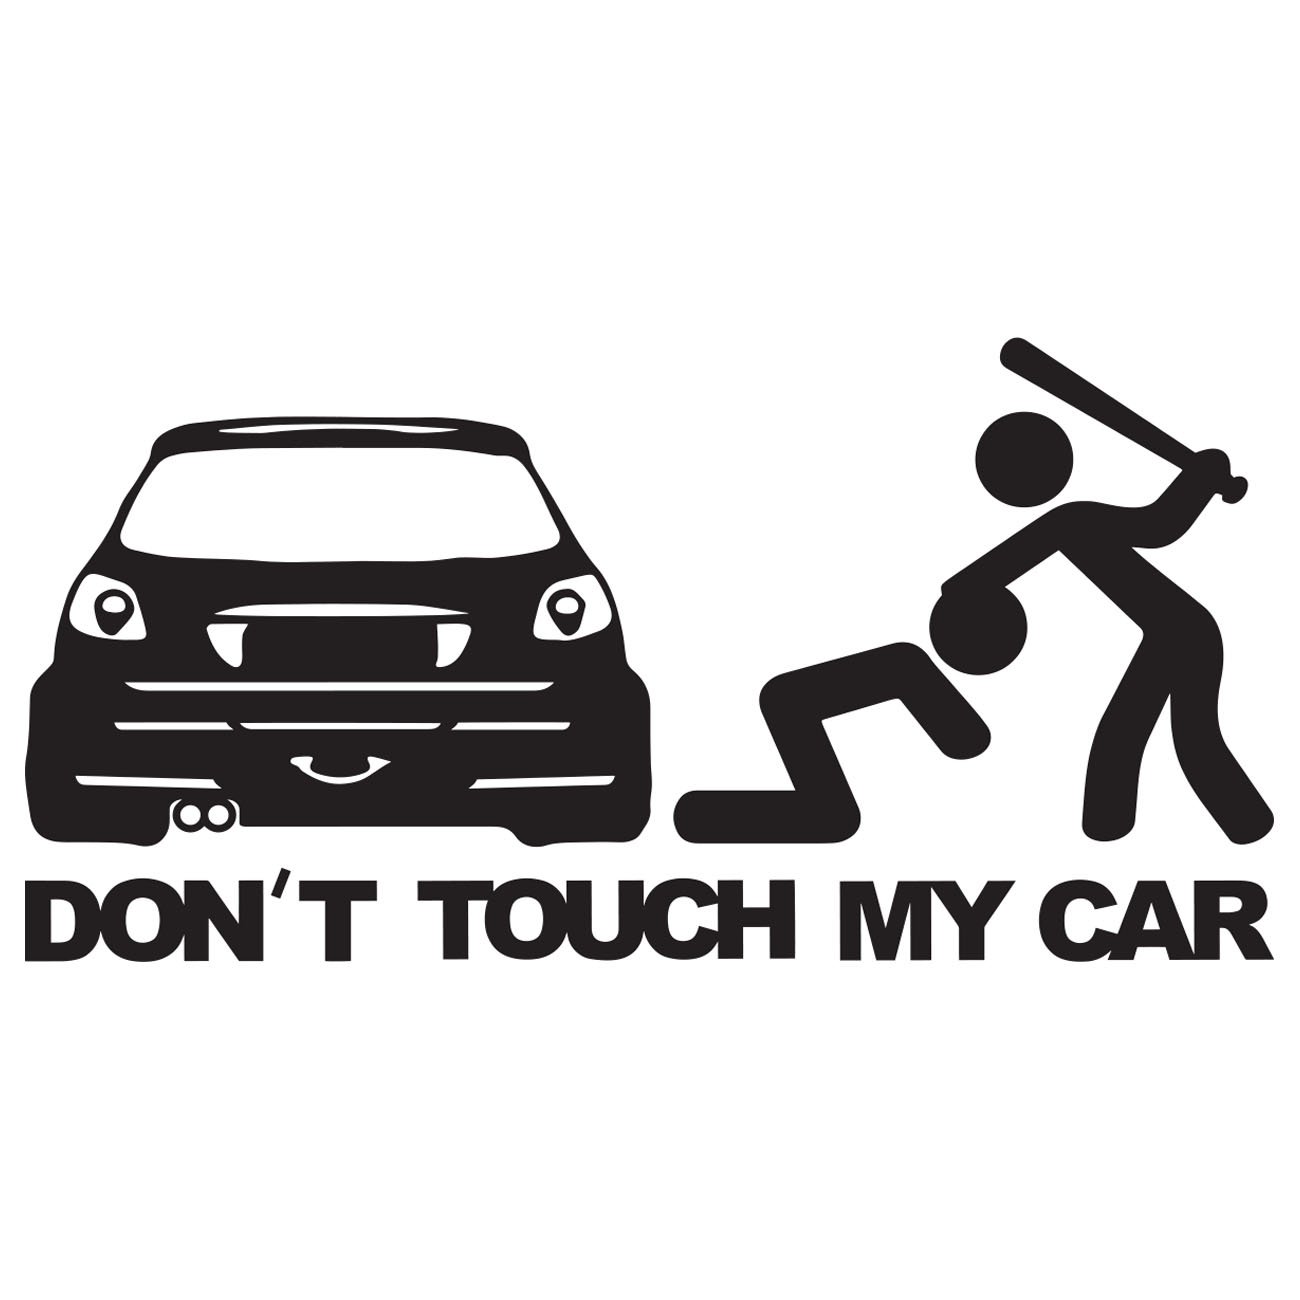 Dont touch my car 2 - Peugeot 206